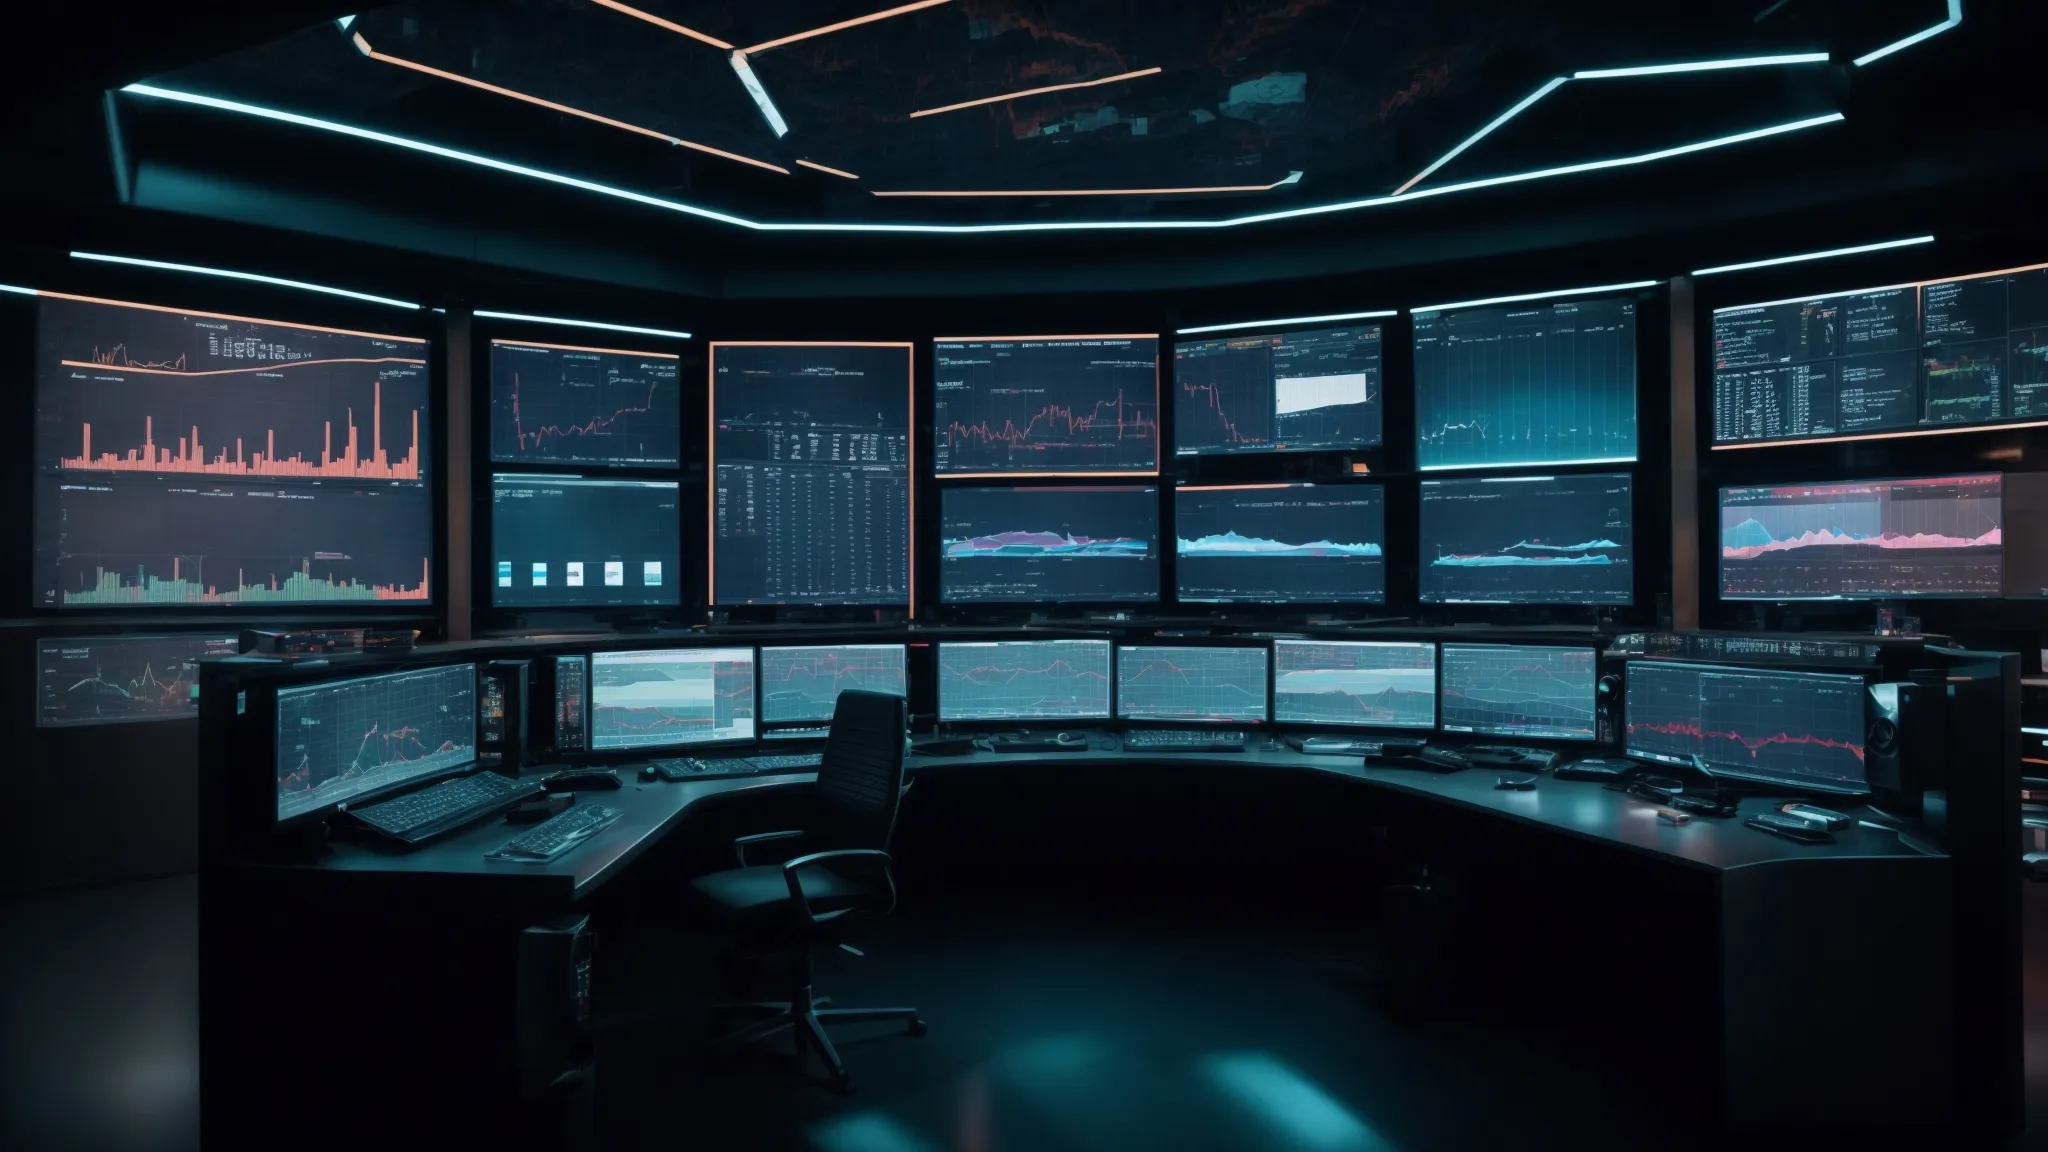 a futuristic control room with screens displaying various graphs and analytics data.